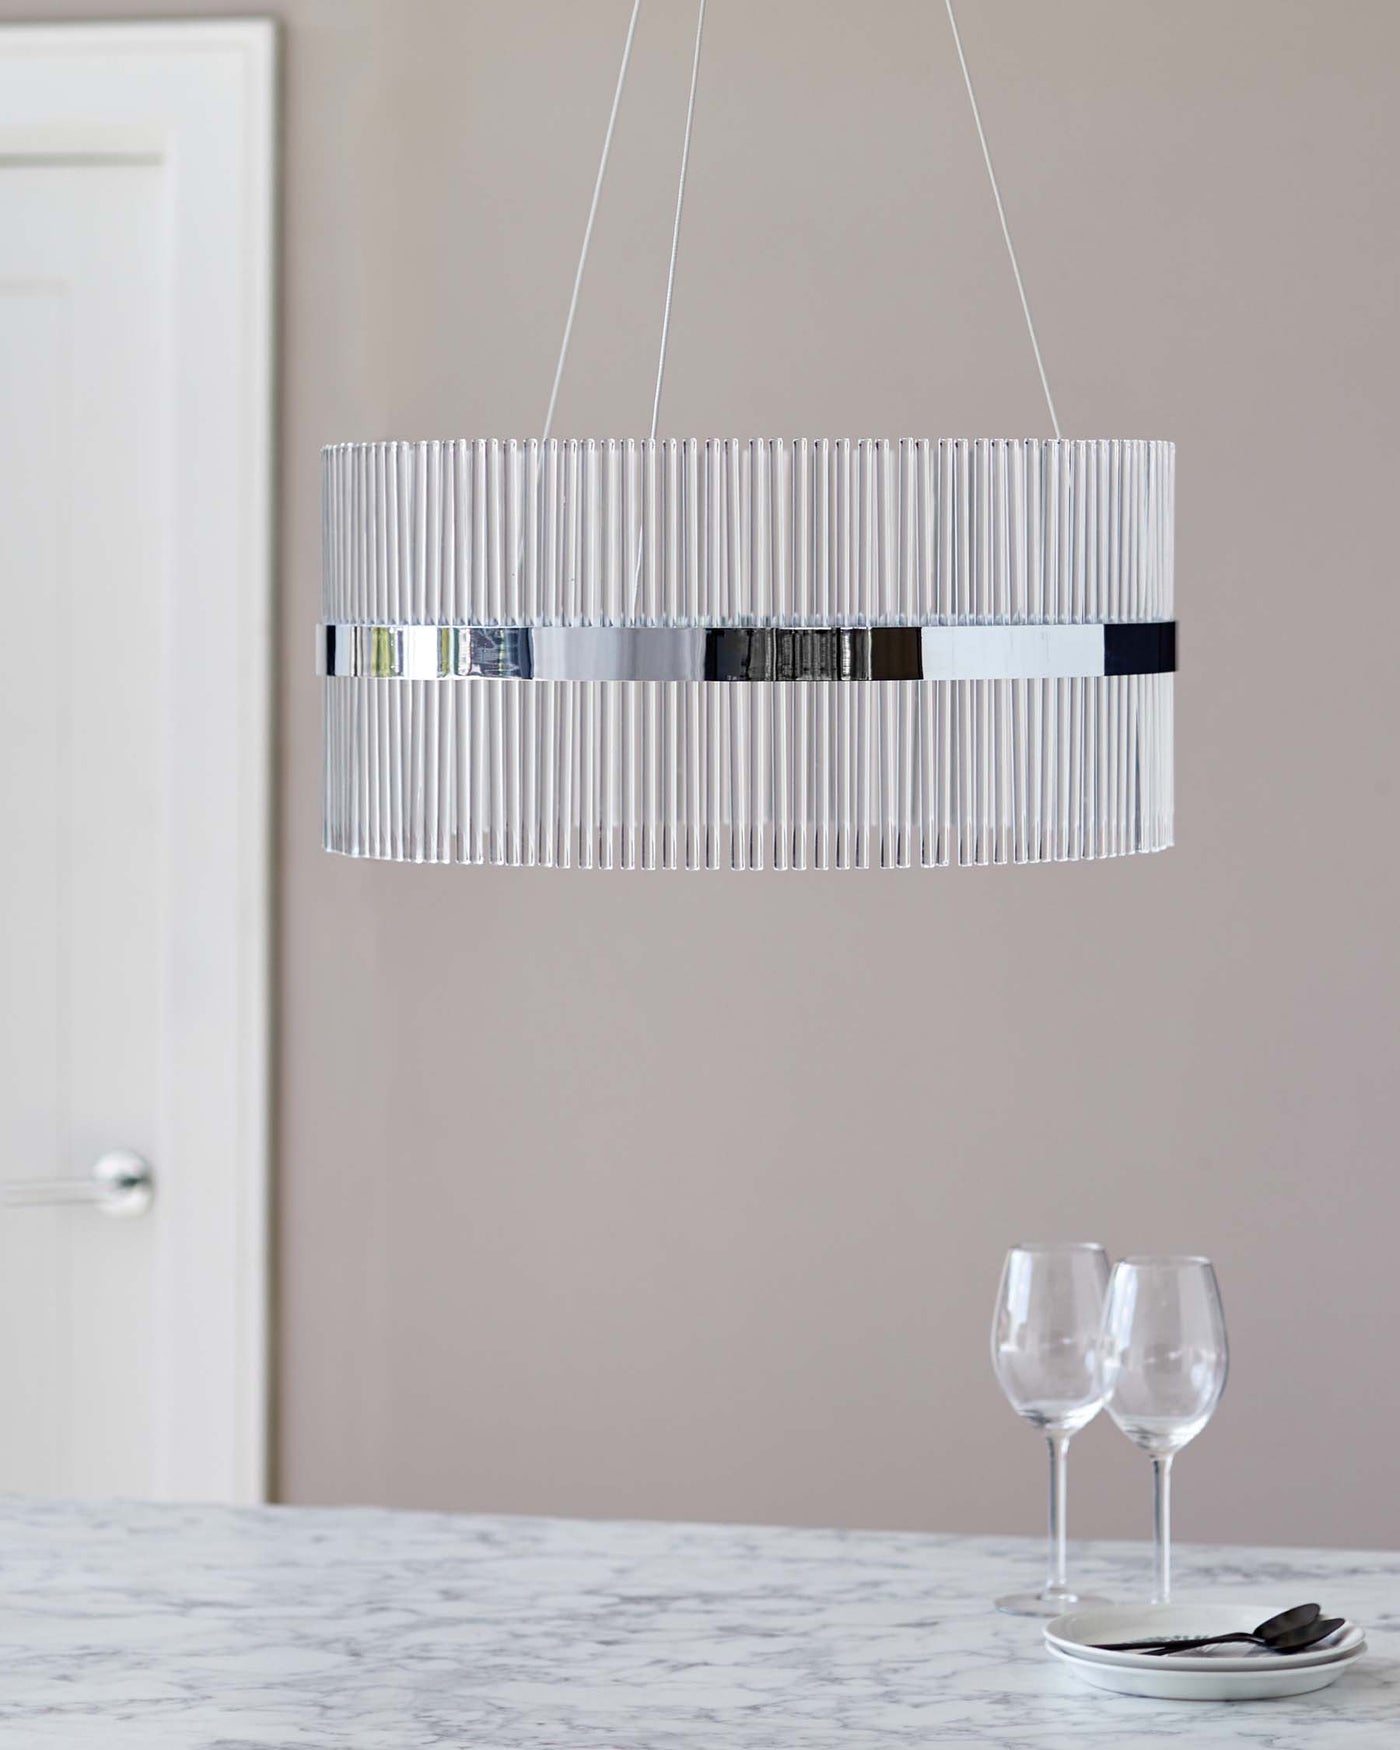 Modern cylindrical pendant light with vertical frosted glass rods and chrome accents suspended above a marble countertop.